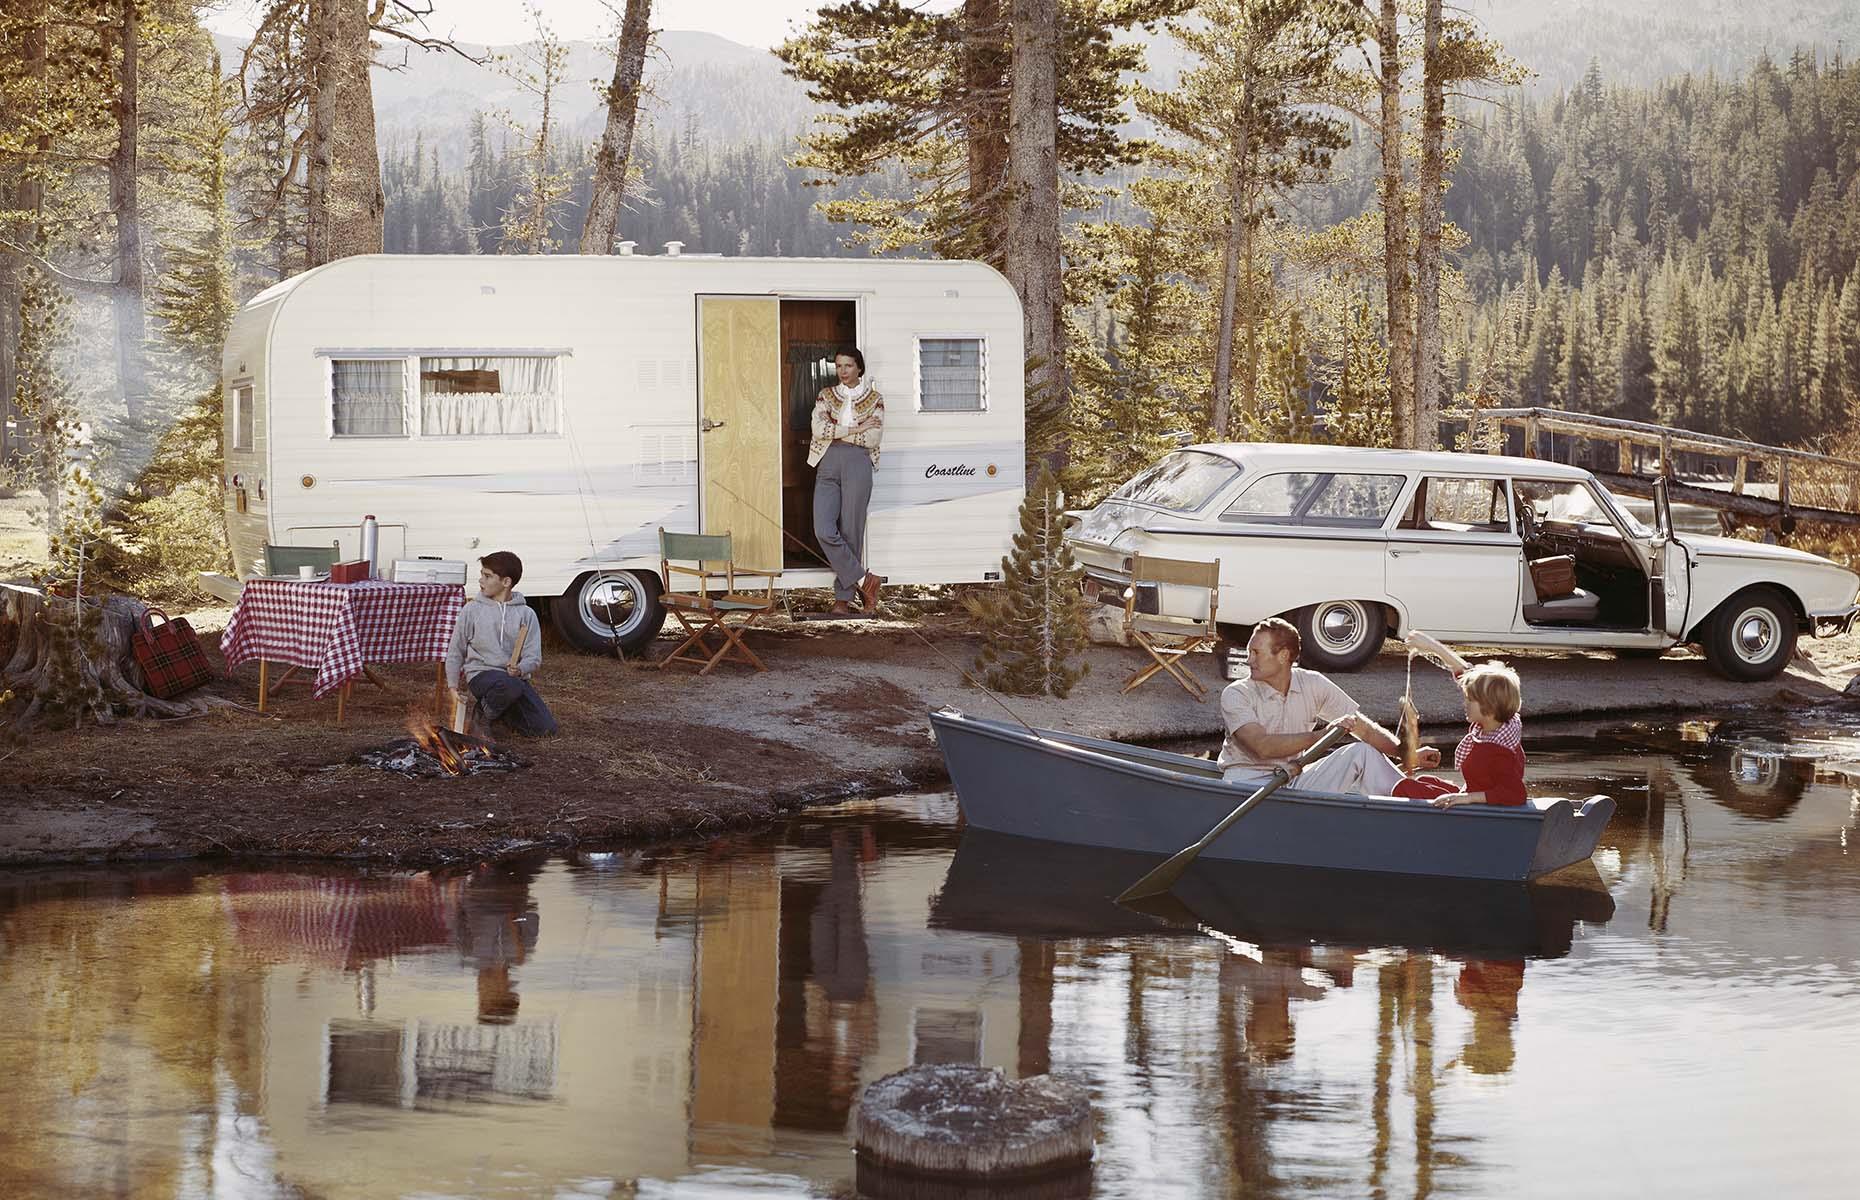 Despite the growing appetite for motorized RVs, the popularity of trailers showed no sign of abating either. This 1950s family have the perfect set-up: a lakeside pitch shaded by trees, a picnic-ready table and a rowing boat for adventures.